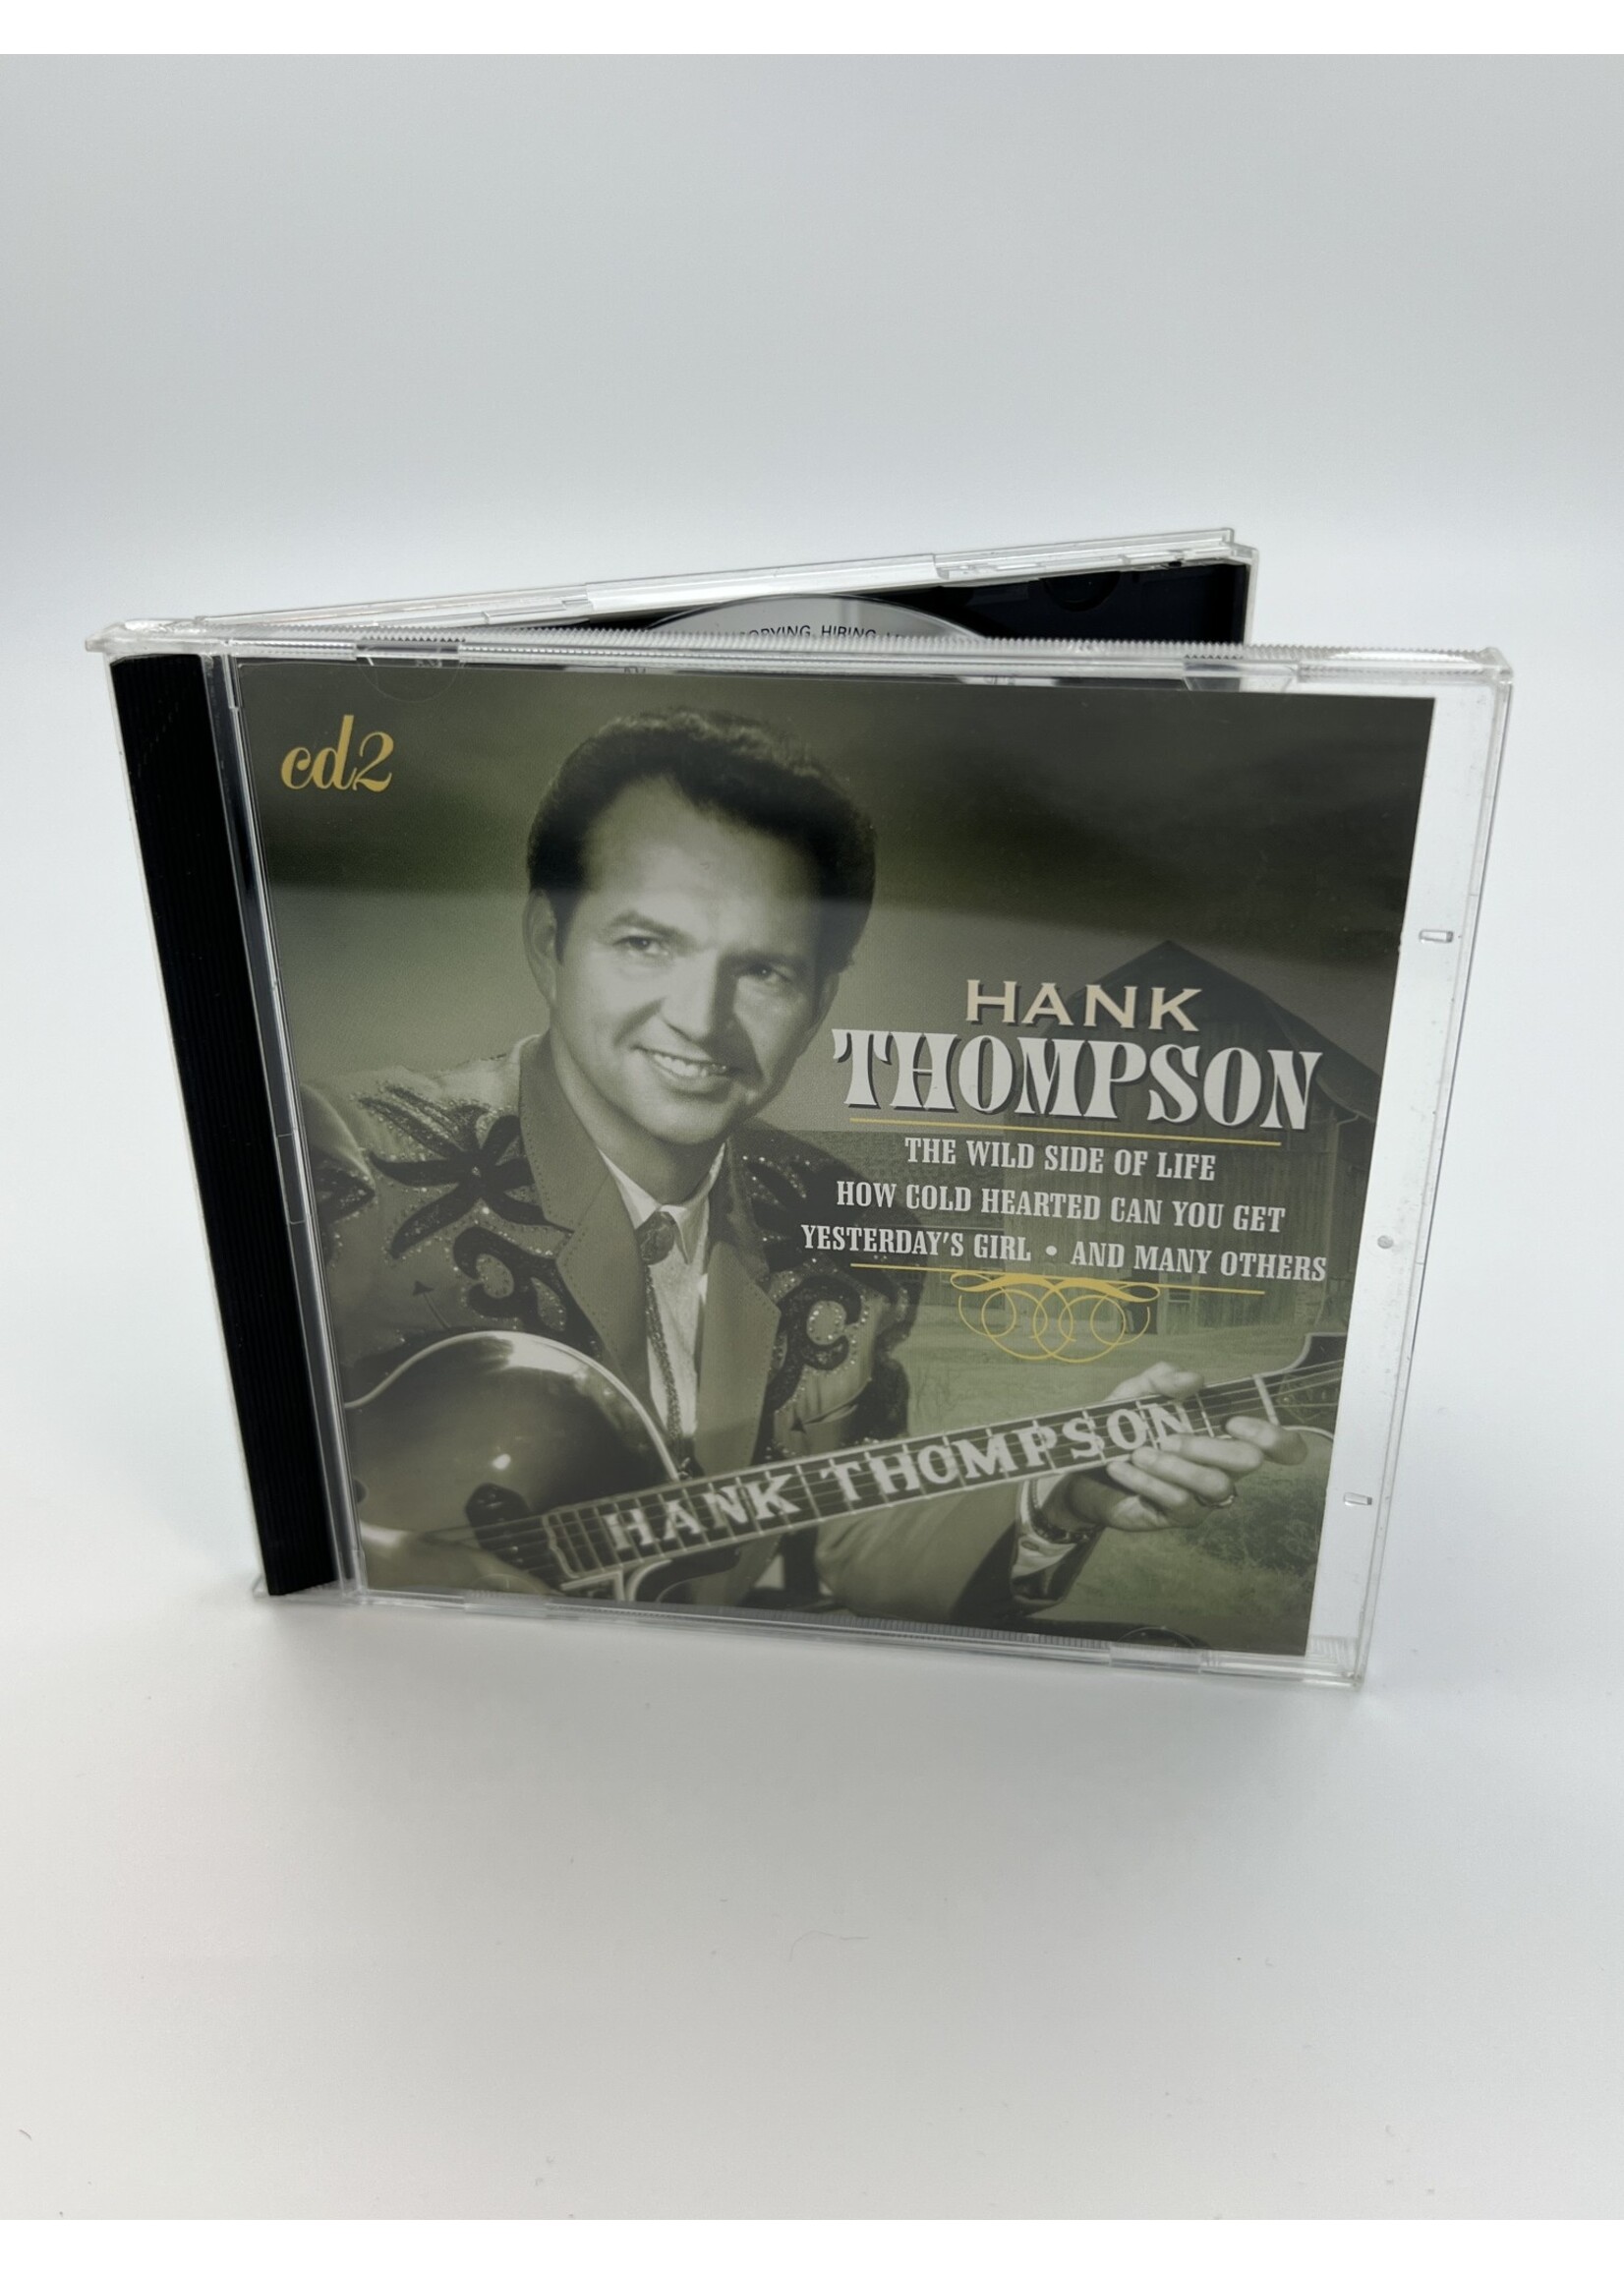 CD Hank Thompson Most Of All 2 CD